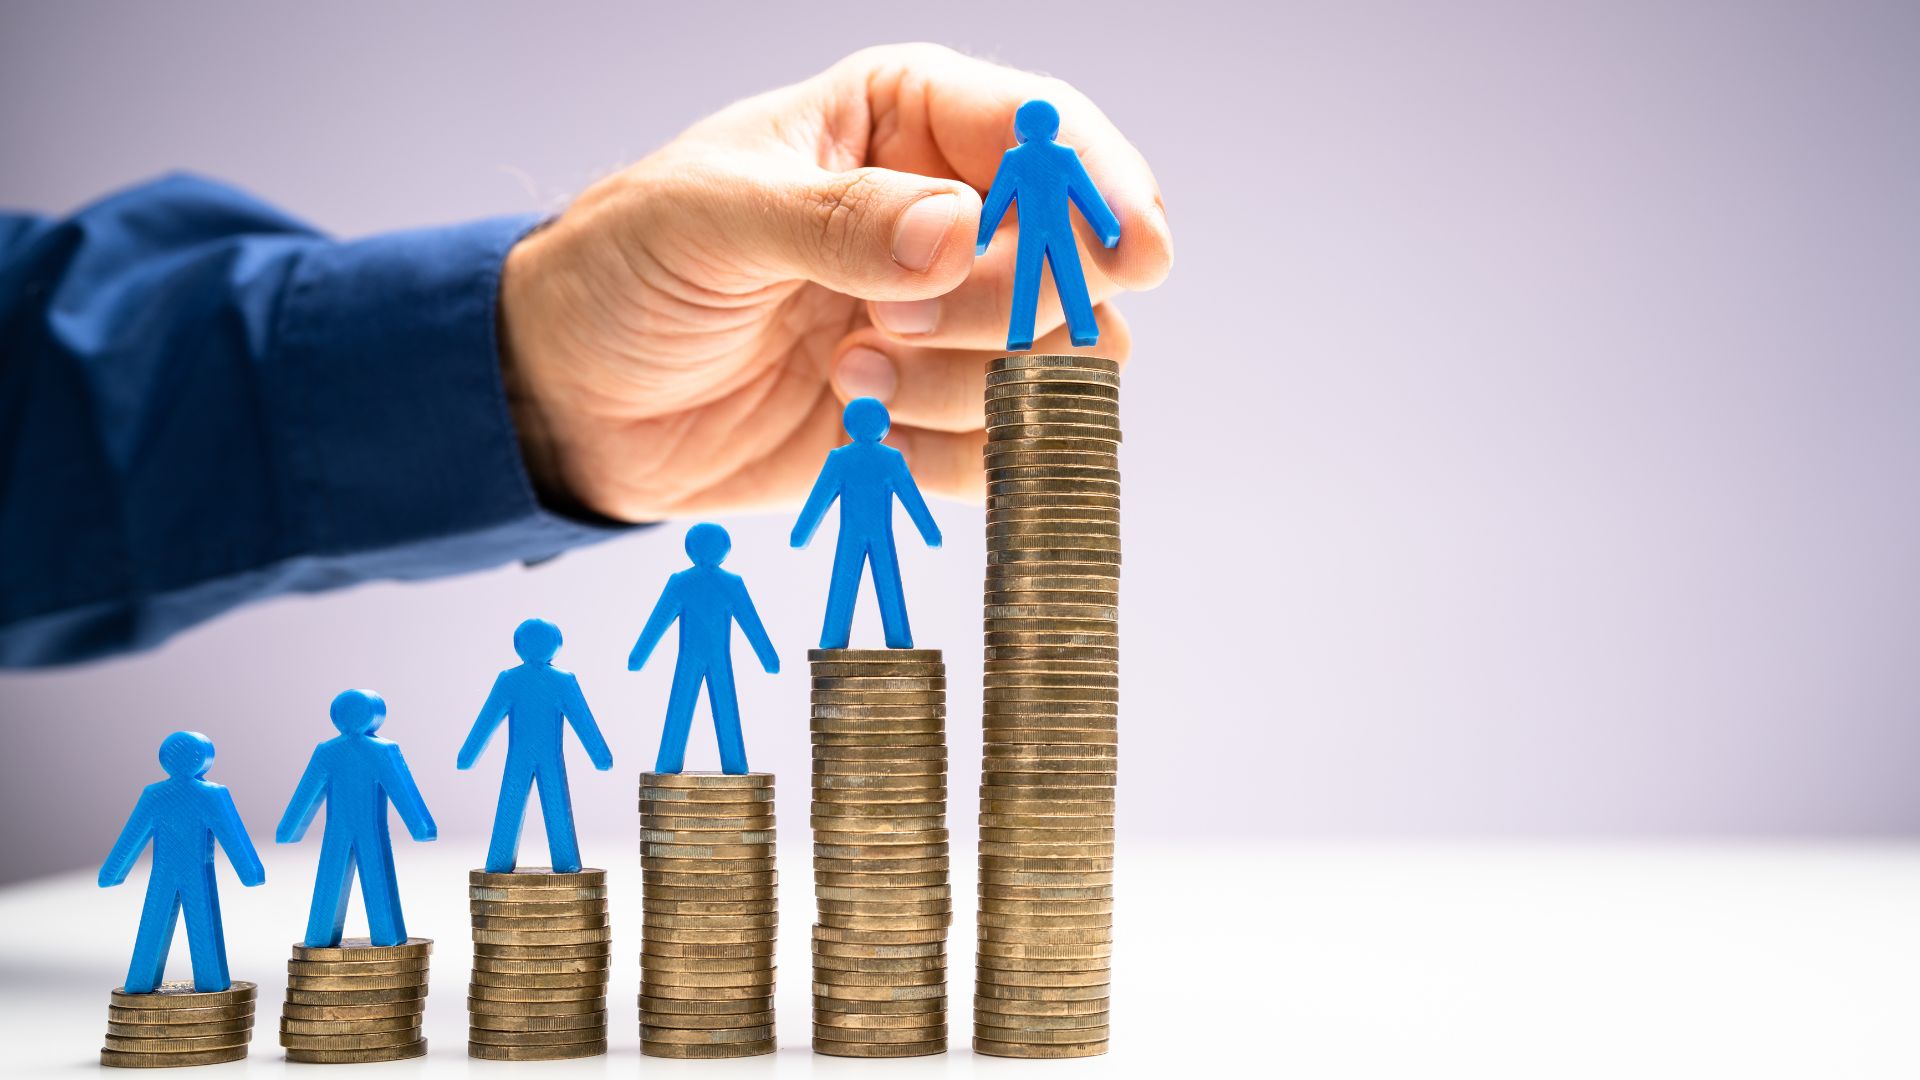 4 Compelling Reasons Why You Should Include a Salary Range in Your Job Postings